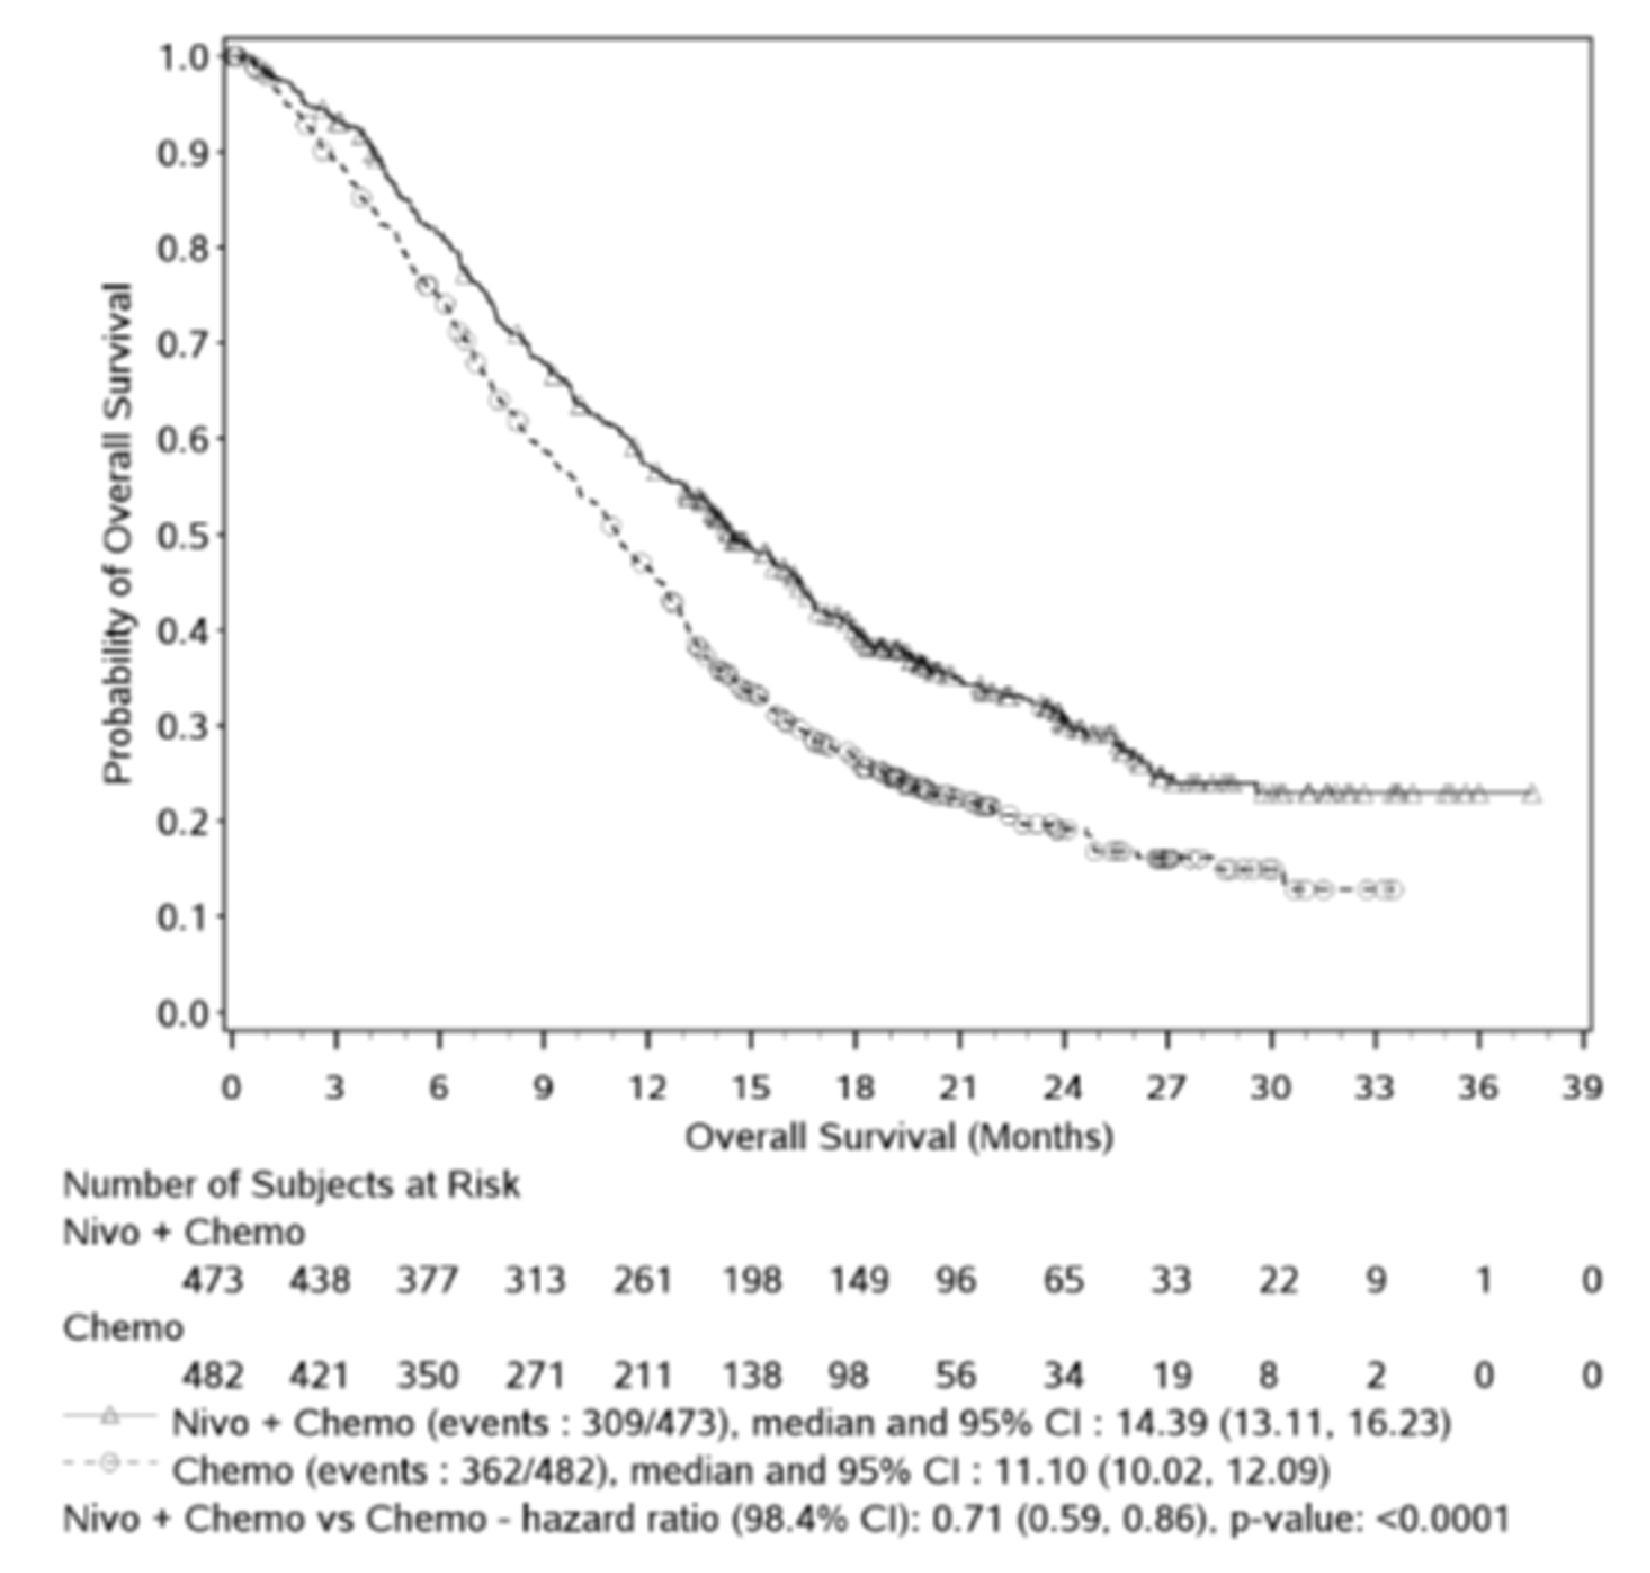 In this Kaplan-Meier analysis of OS among patients with PD-L1 CPS ≥ 5 in the CheckMate-649 trial, approximately 50% of patients receiving chemotherapy had died by 11 months, approximately 75% had died by 18 months, and approximately 85% had died by 30 months. In contrast, approximately 50% and 75% of patients receiving nivolumab plus chemotherapy had died by 14 months and 24 months, respectively, with only small decreases in survival probability thereafter. Median time to death was 14.39 (95% CI, 13.11 to 16.23) months among patients receiving nivolumab plus chemotherapy and 11.10 (10.02 to 12.09) months among patients receiving chemotherapy (HR 0.71; 98.4% CI, 0.59 to 0.86; P < 0.0001). The number of at-risk patients receiving nivolumab plus chemotherapy at 0, 3, 6, 9, 12, 15, 18, 21, 24, 27, 30, 33, 36, and 39 months was 473, 438, 377, 313, 261, 198, 149, 96, 65, 33, 22, 9, 1, and 0, respectively. The number of at-risk patients receiving chemotherapy at 0, 3, 6, 9, 12, 15, 18, 21, 24, 27, 30, 33, 36, and 39 months was 482, 421, 350, 271, 211, 138, 98, 56, 34, 19, 8, 2, 0, and 0, respectively.